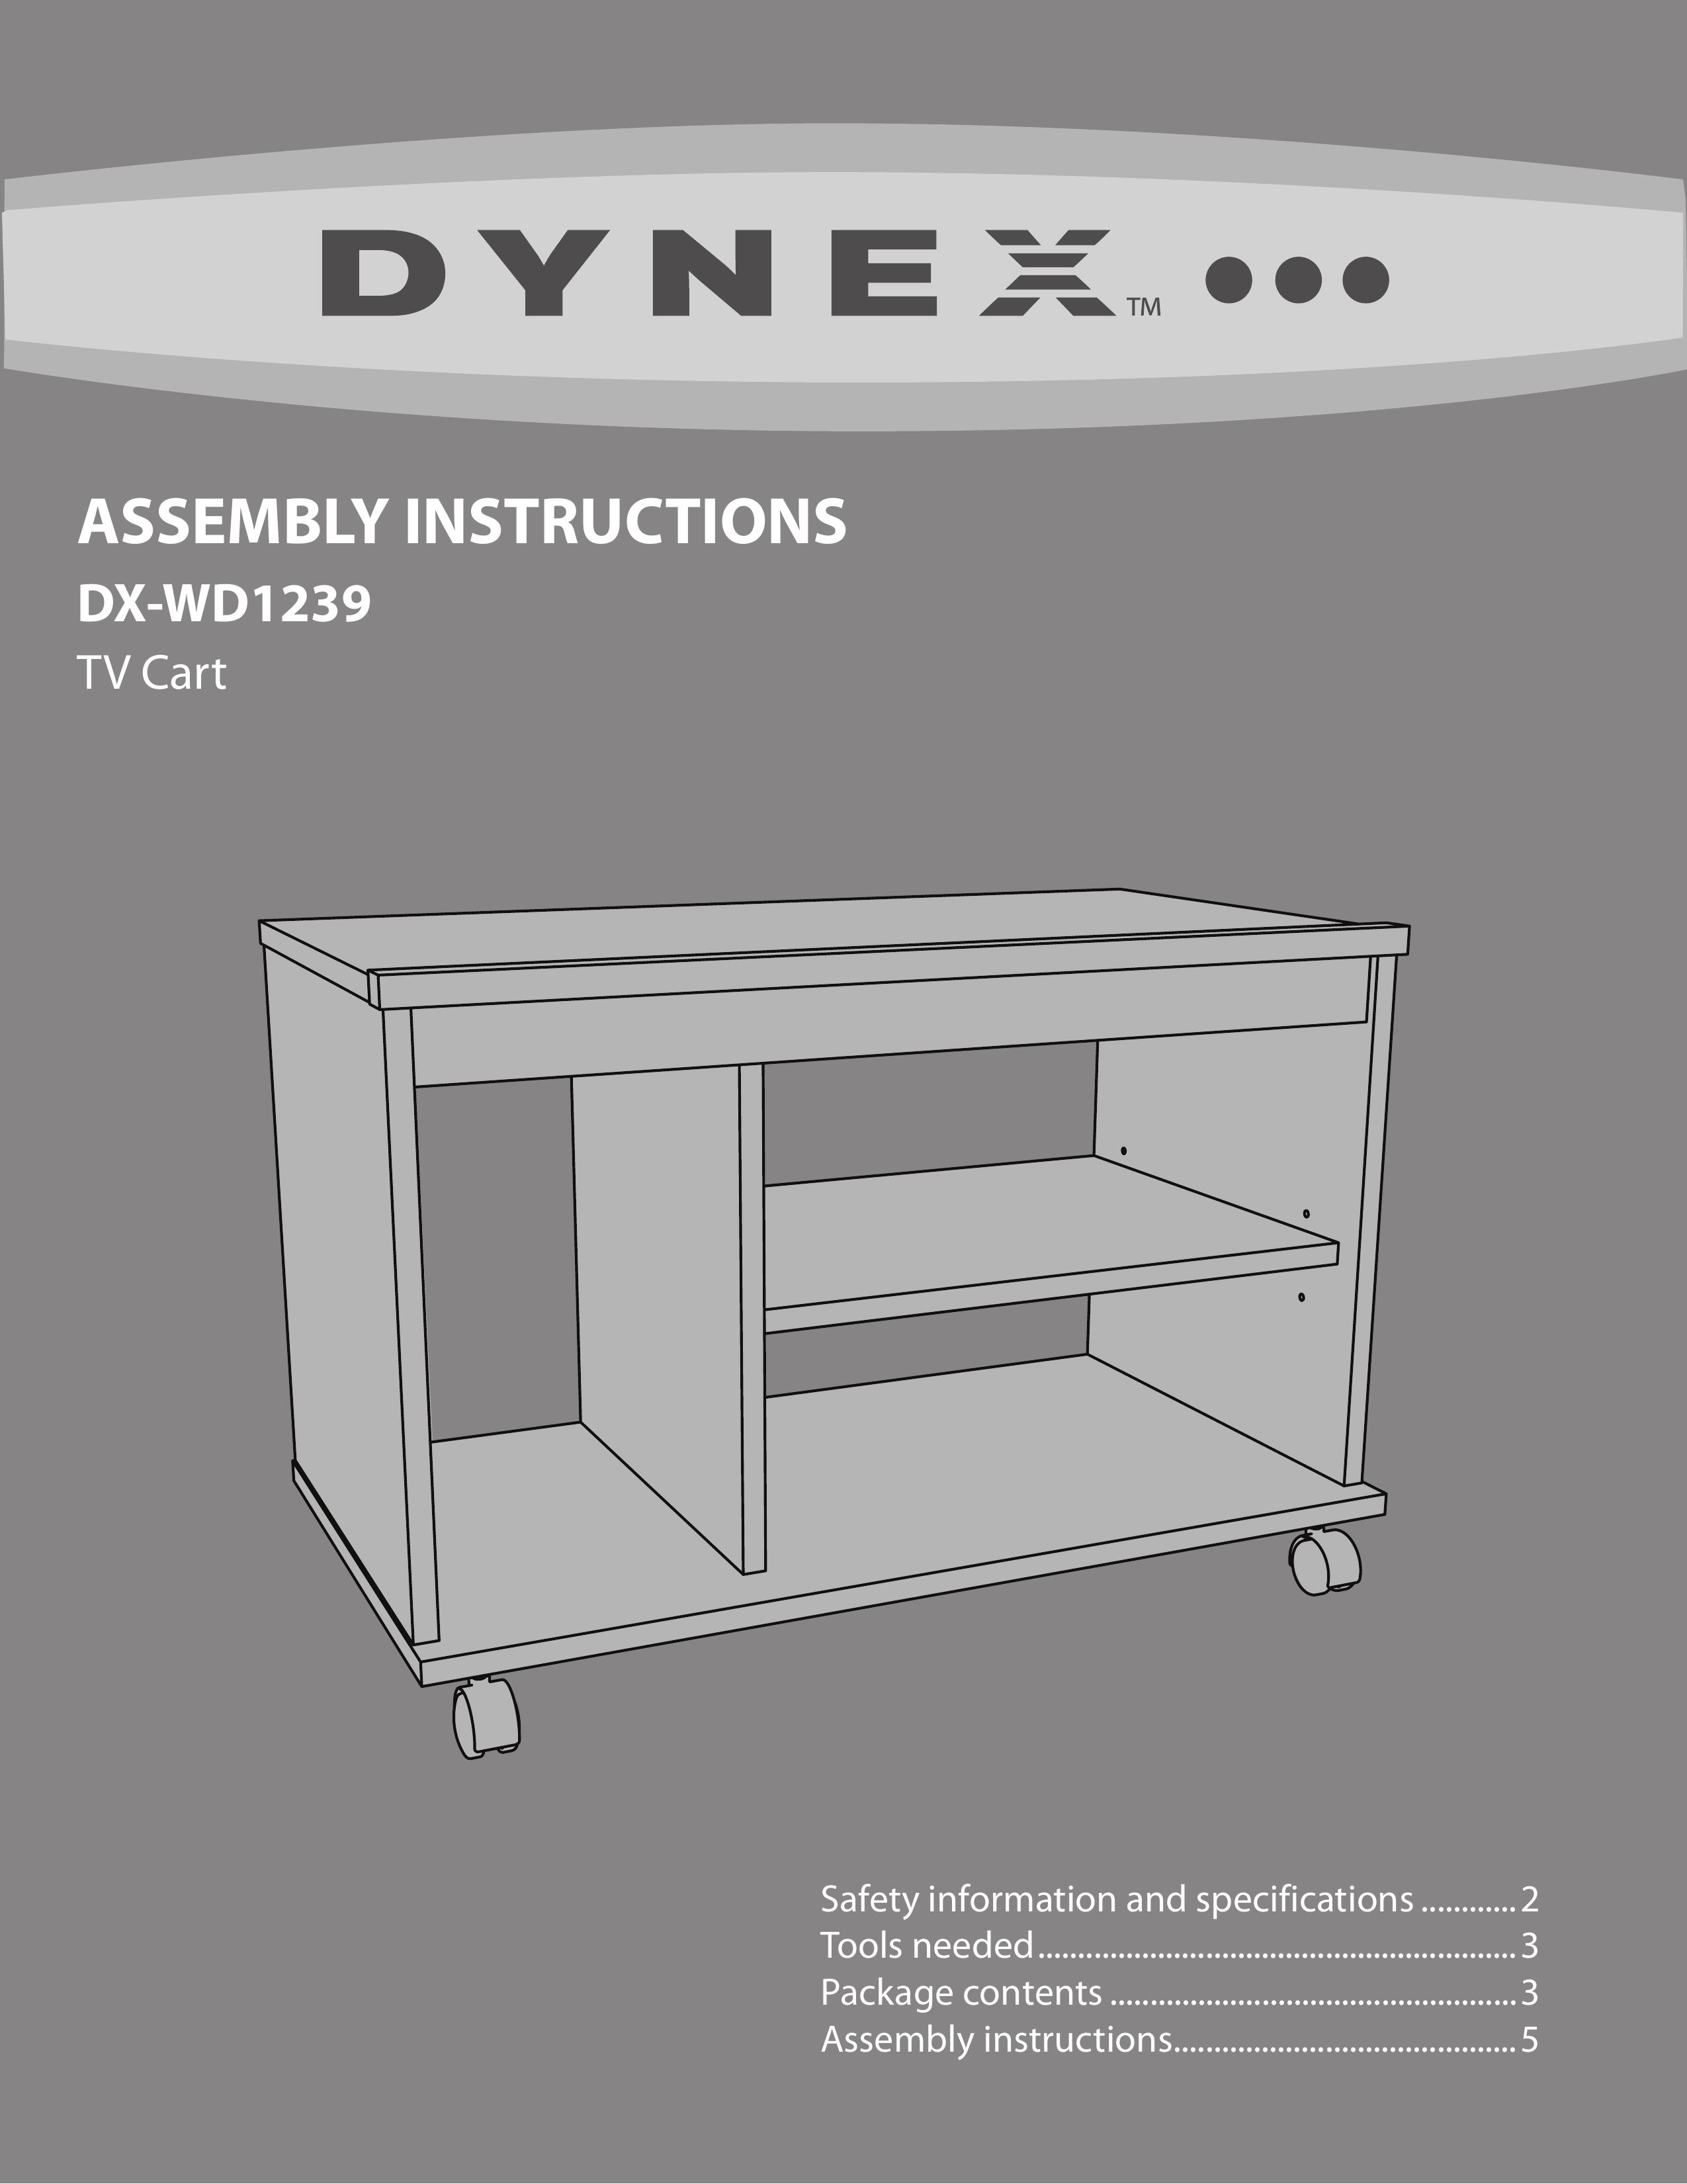 Dynex DX-WD1239 Outdoor Cart User Manual